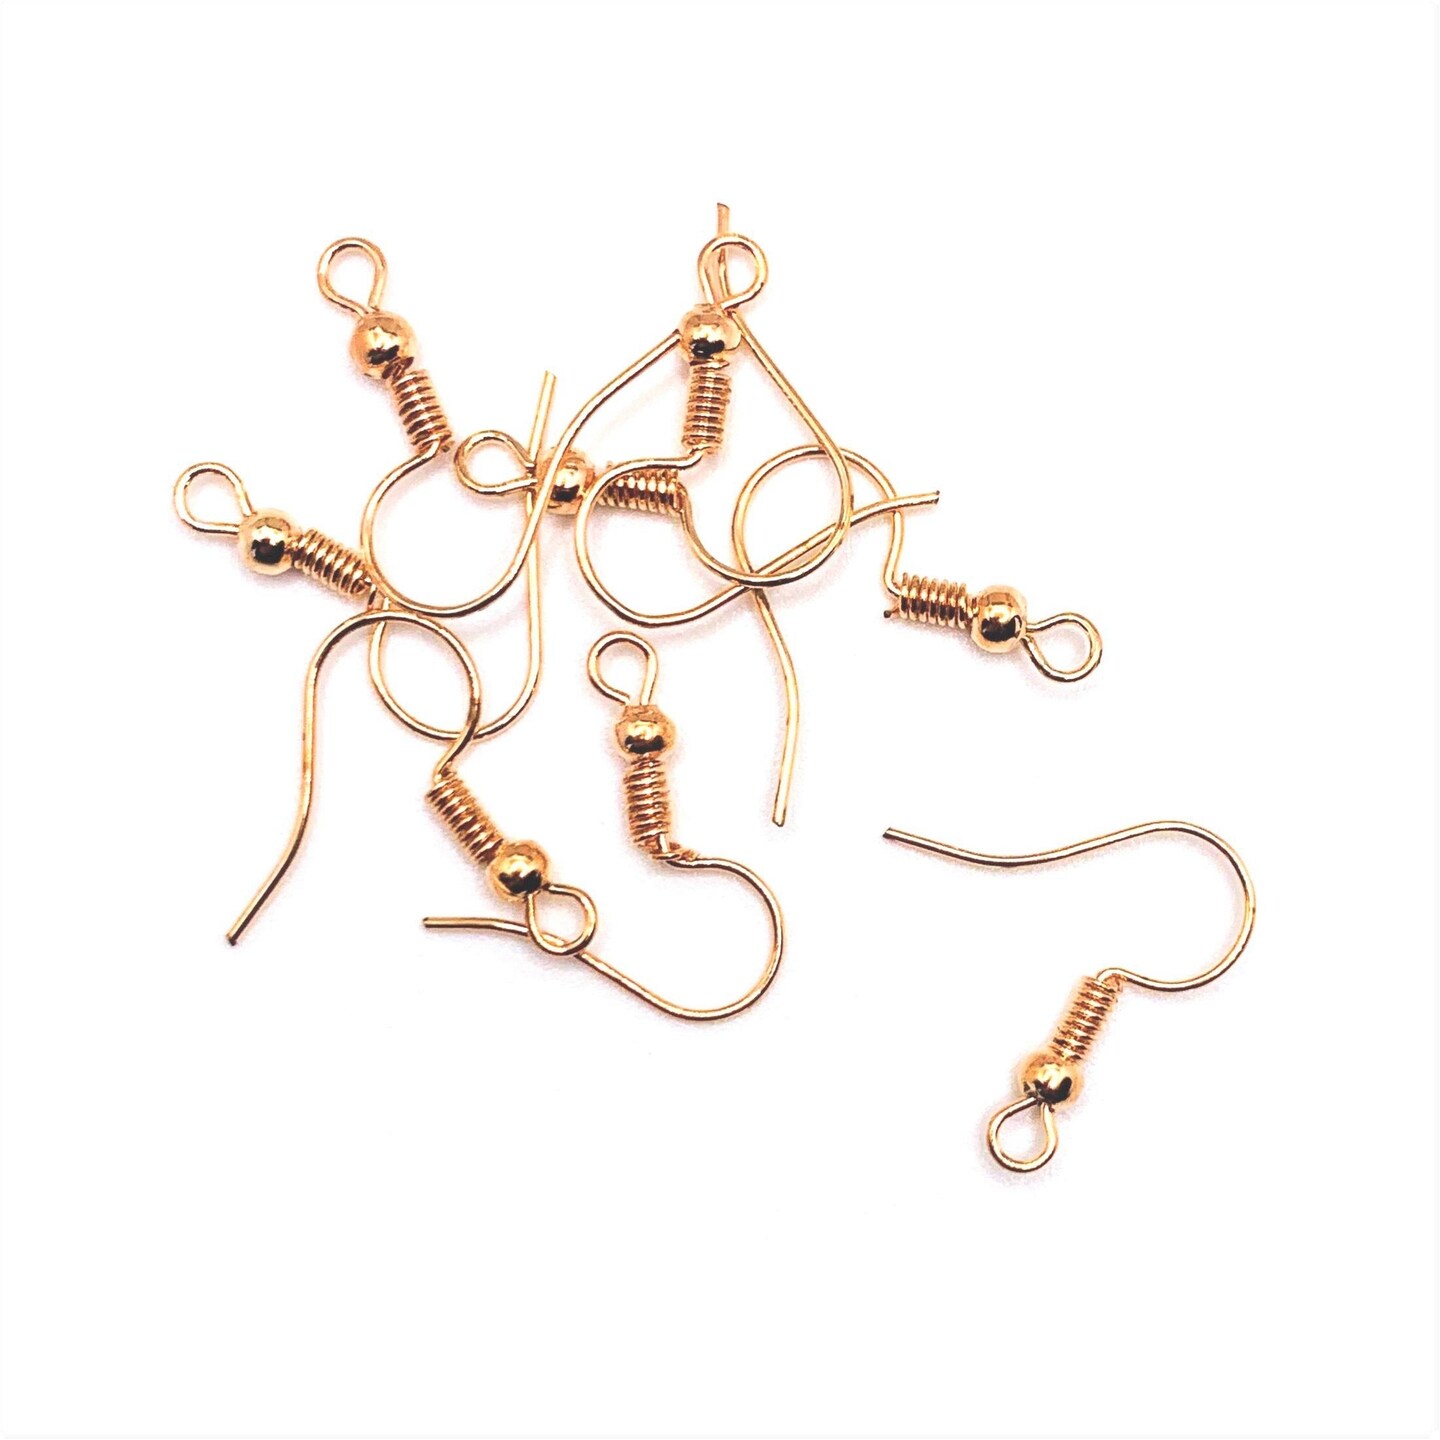 100 or 500 Pieces: Bright Rose Gold Fish Hook Earring Wires with Spring and  Ball